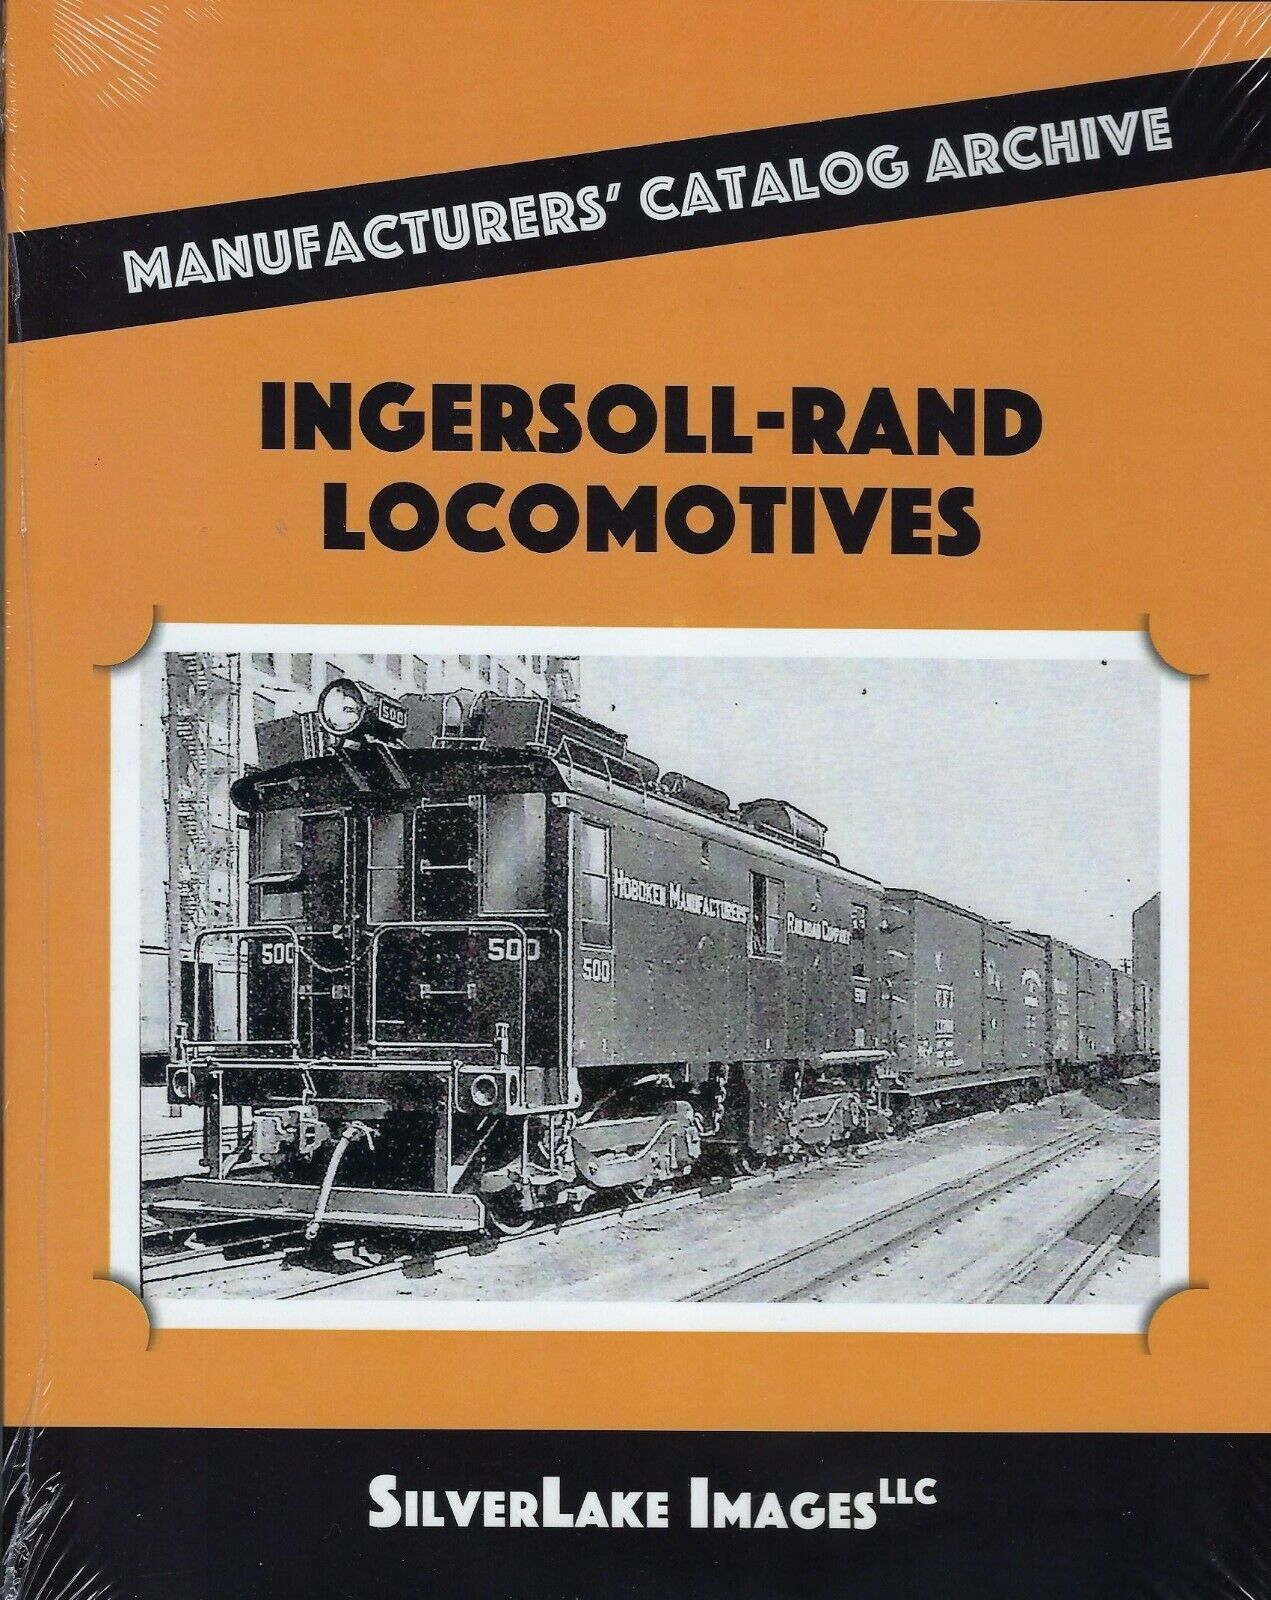 INGERSOLL-RAND LOCOMOTIVES from Manufacturers\' Catalog Archive (BRAND NEW BOOK)